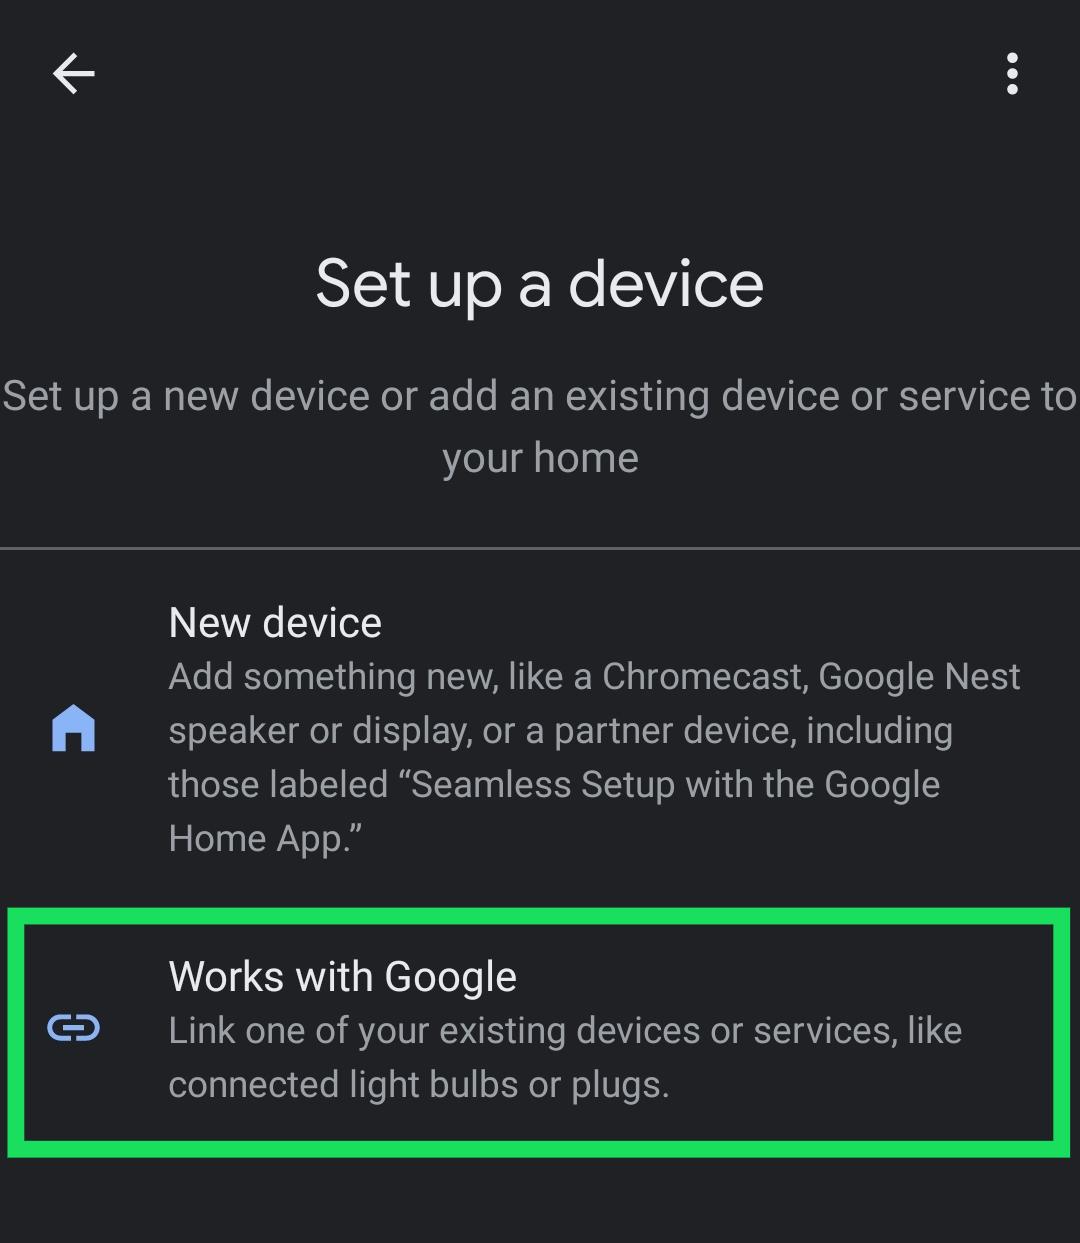 What Works With Google Home?